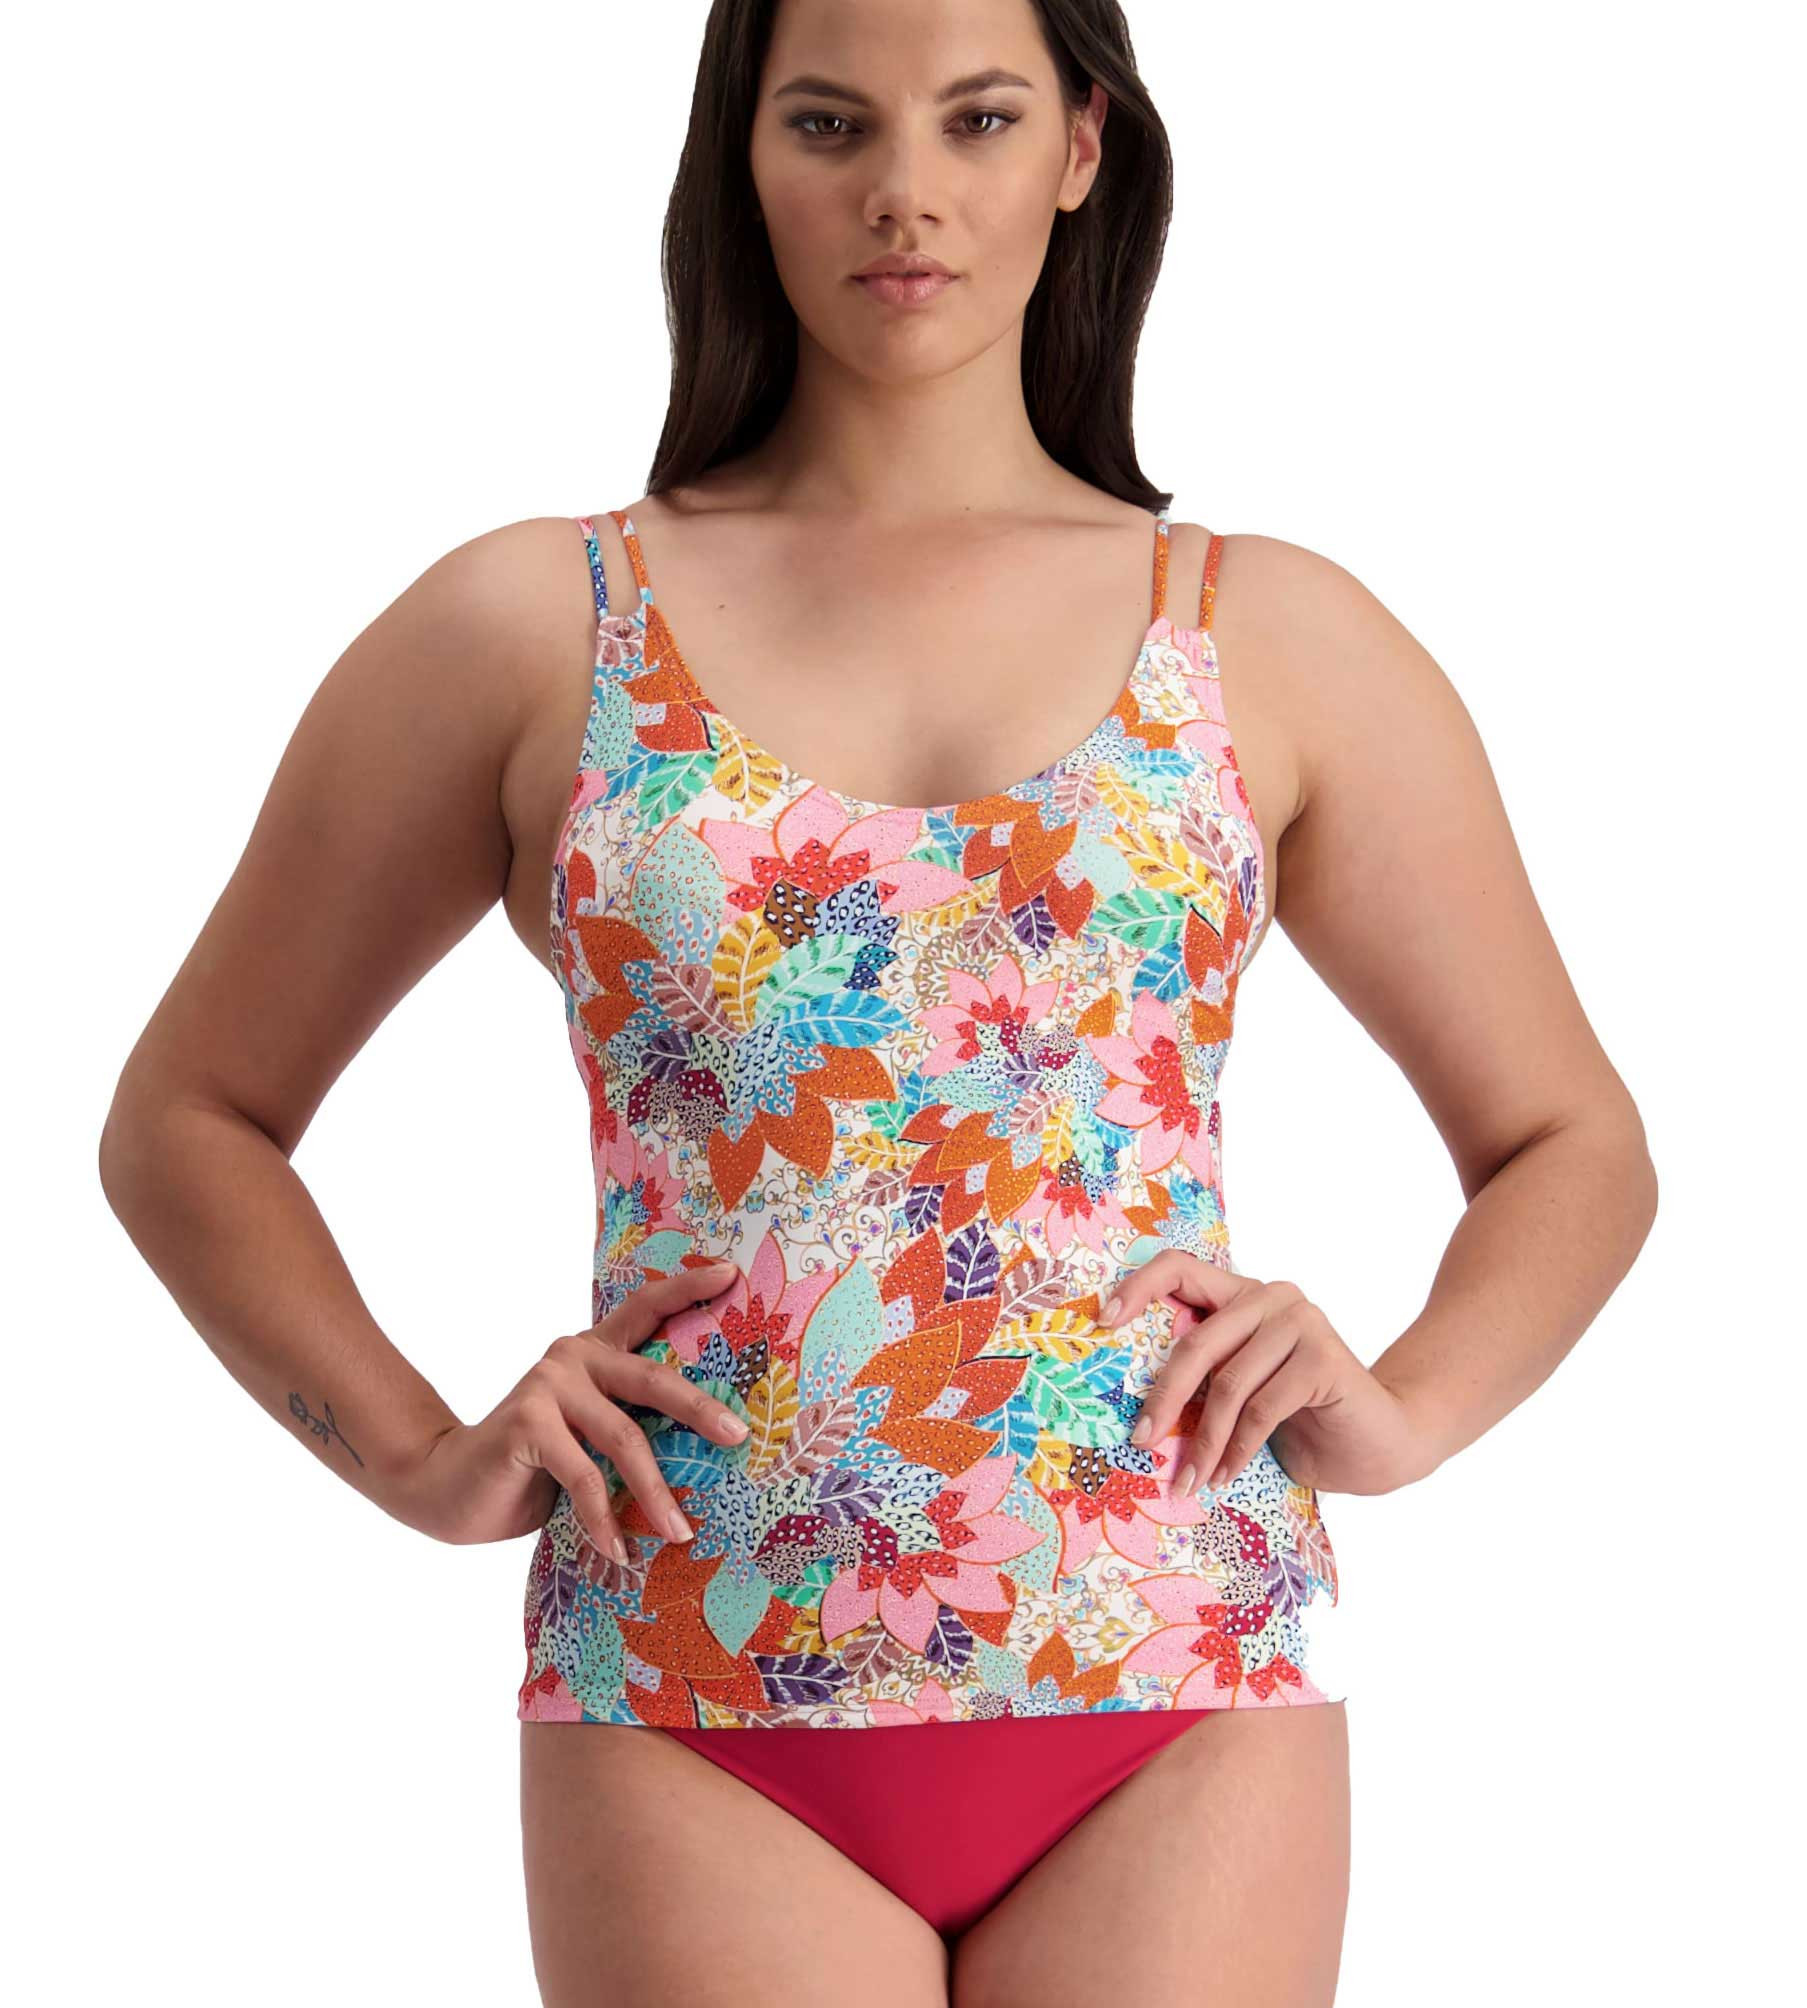 mix and match comfortable tankinis and feel beautiful shown in print top and plain bikini bottoms. model with long torso